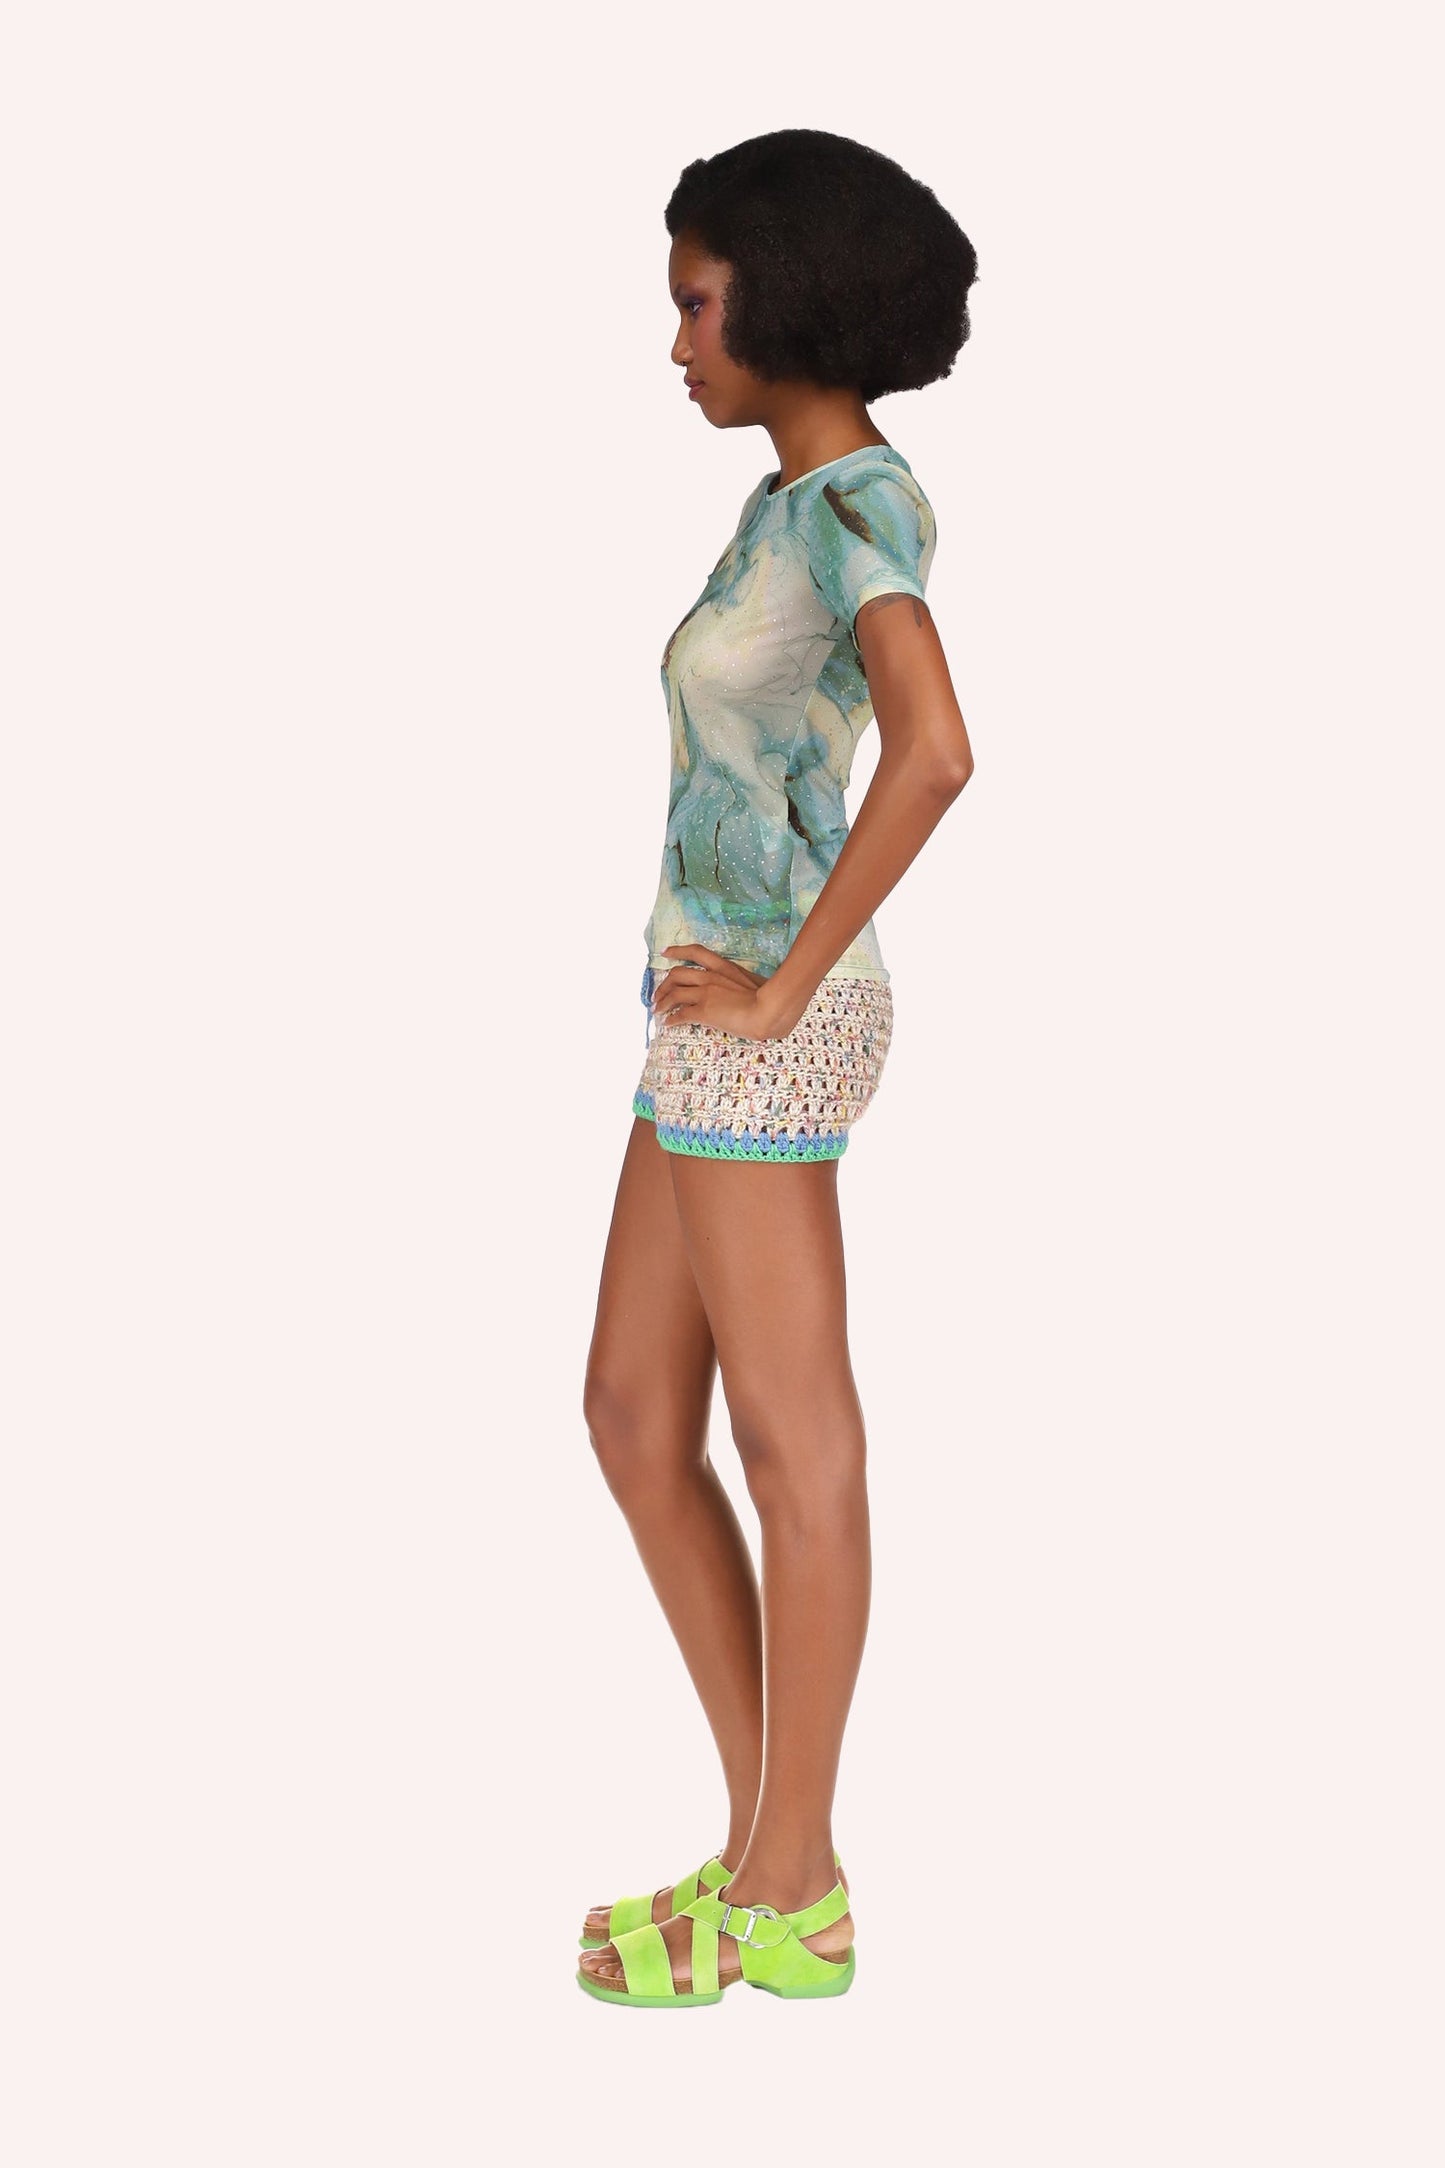 Floral design, Cosmos Mesh Top, Greenish with touch of yellow, small sleeves, crew neck collar